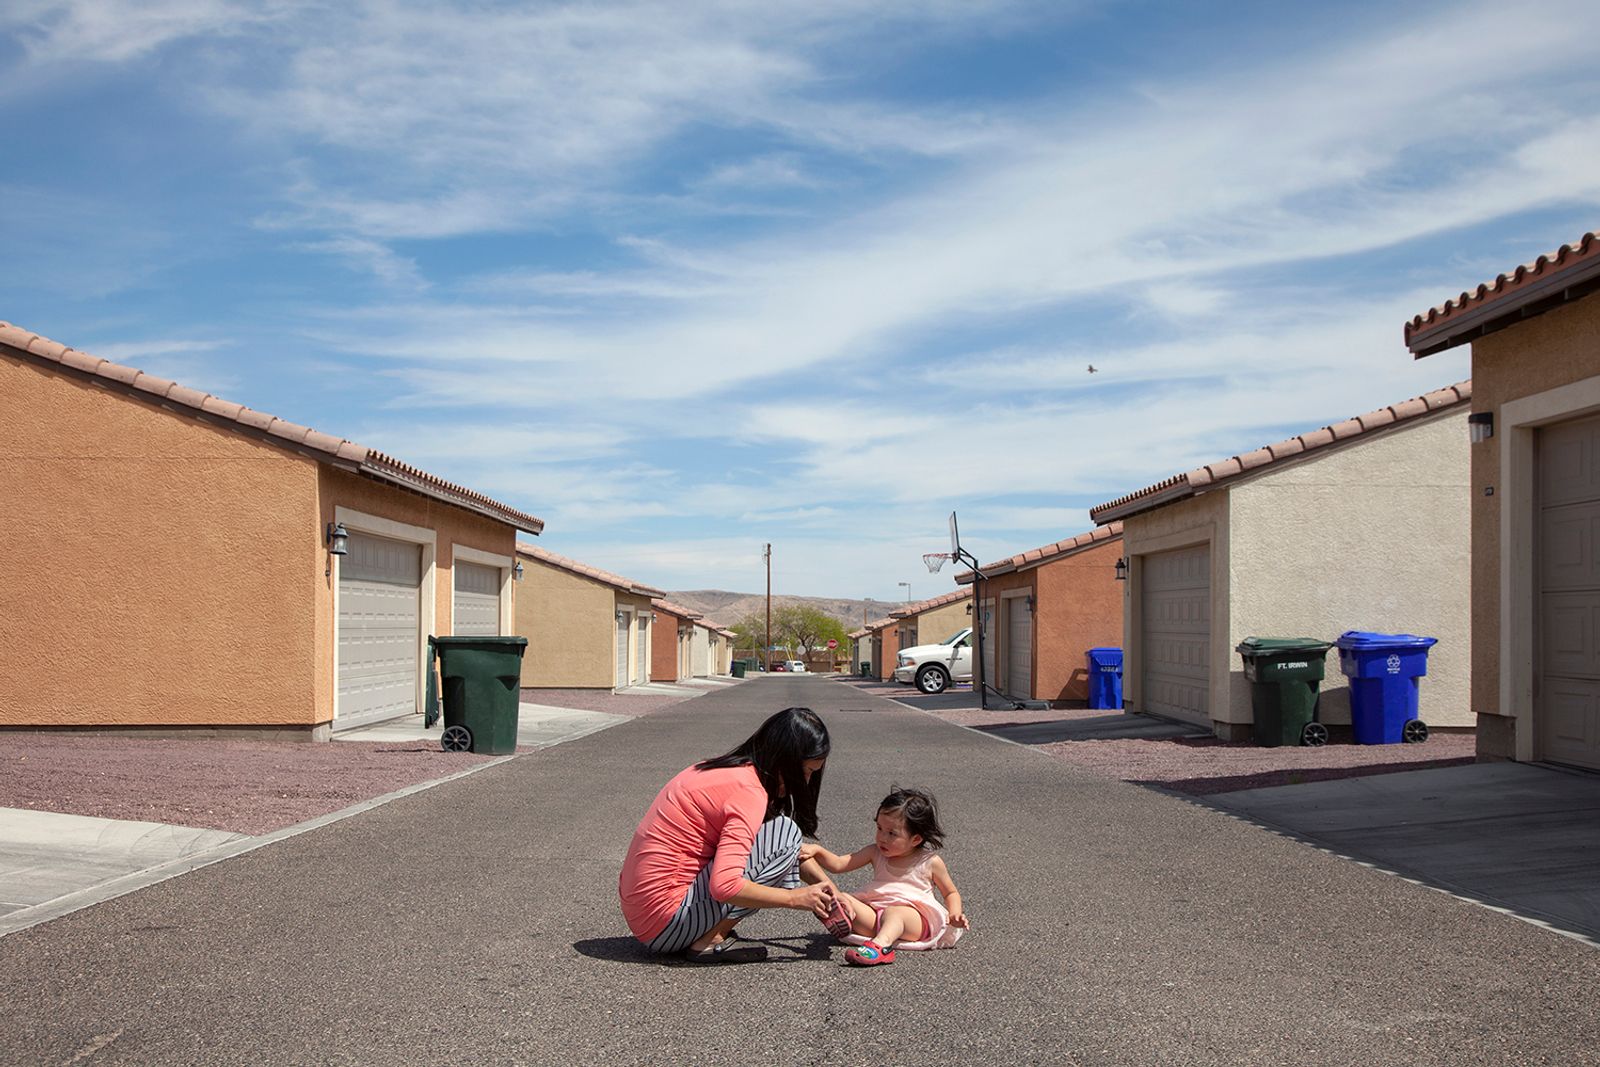 © Arin Yoon - Jiyeong Laue cares for her daughter, Serenity, behind their home in 2014 in Fort Irwin, California.